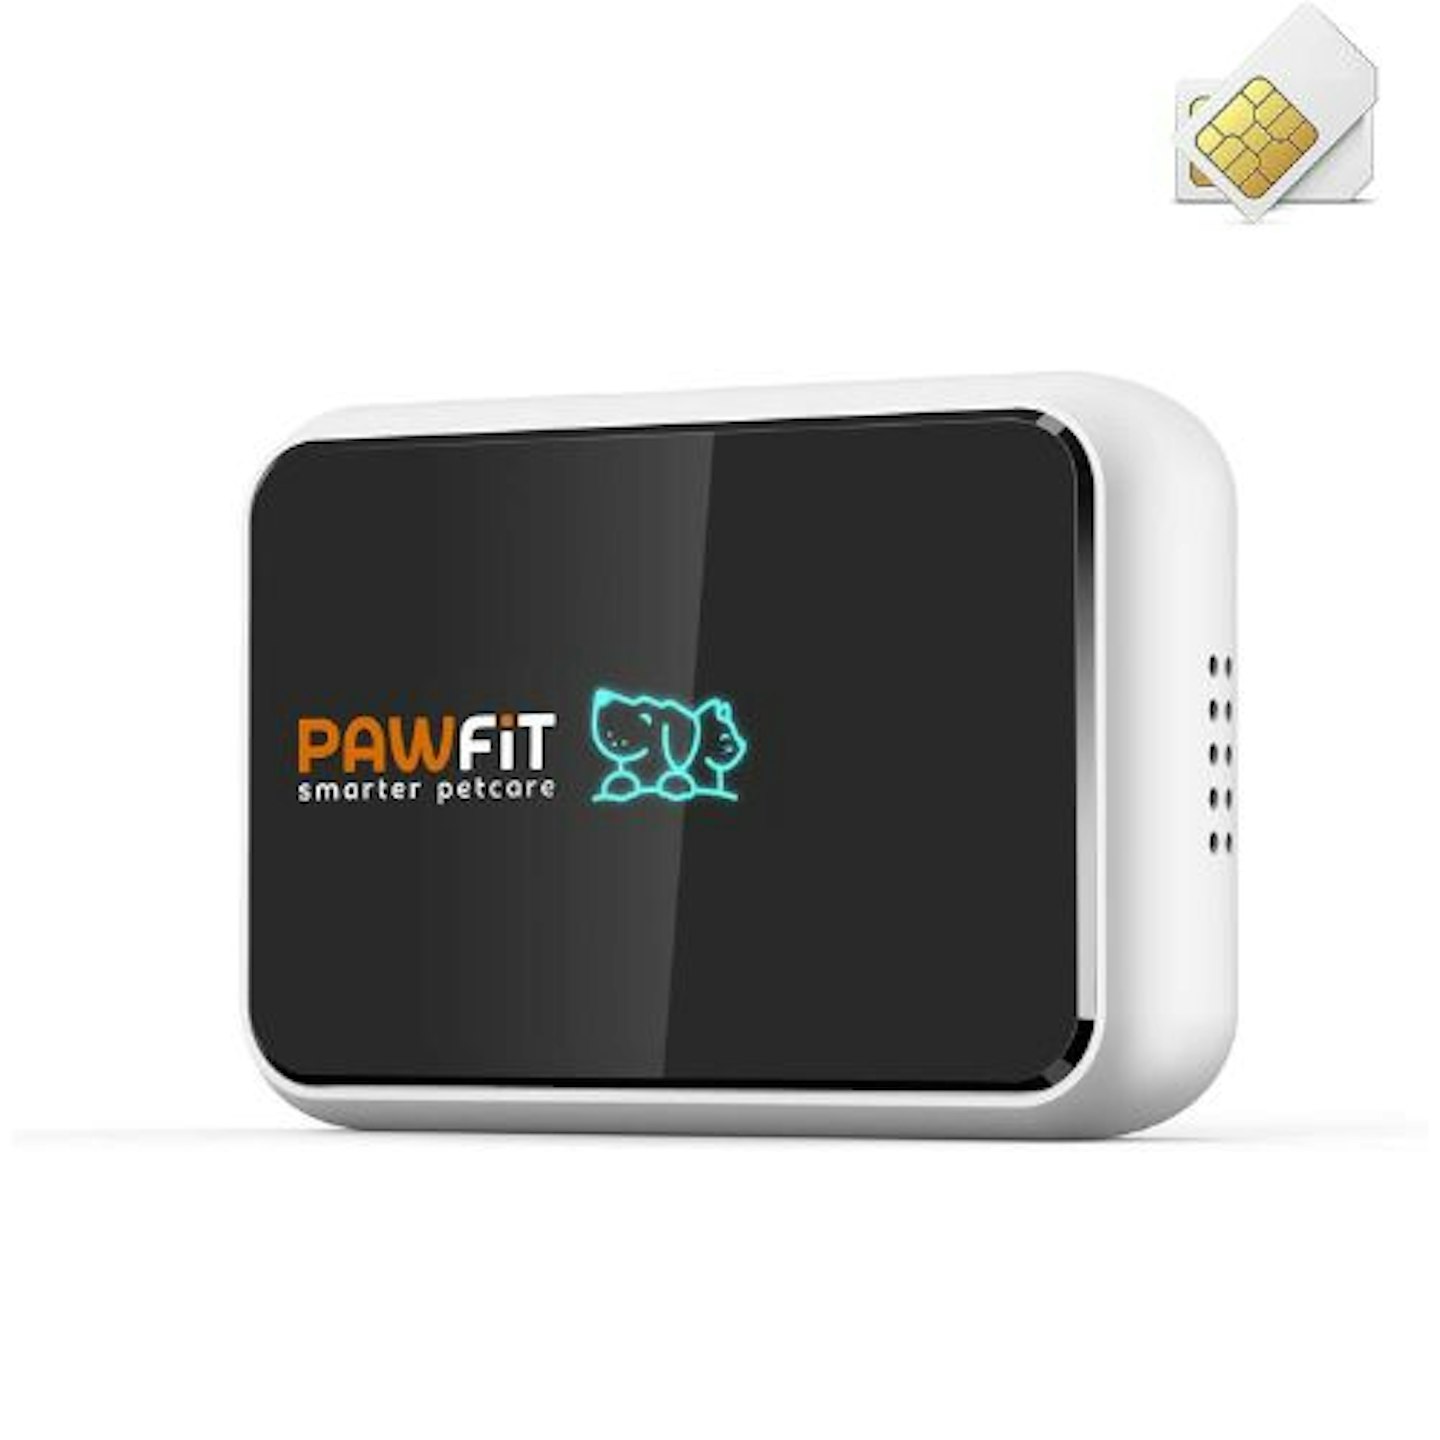 Pawfit 2 Pet GPS Tracker & Activity Monitor